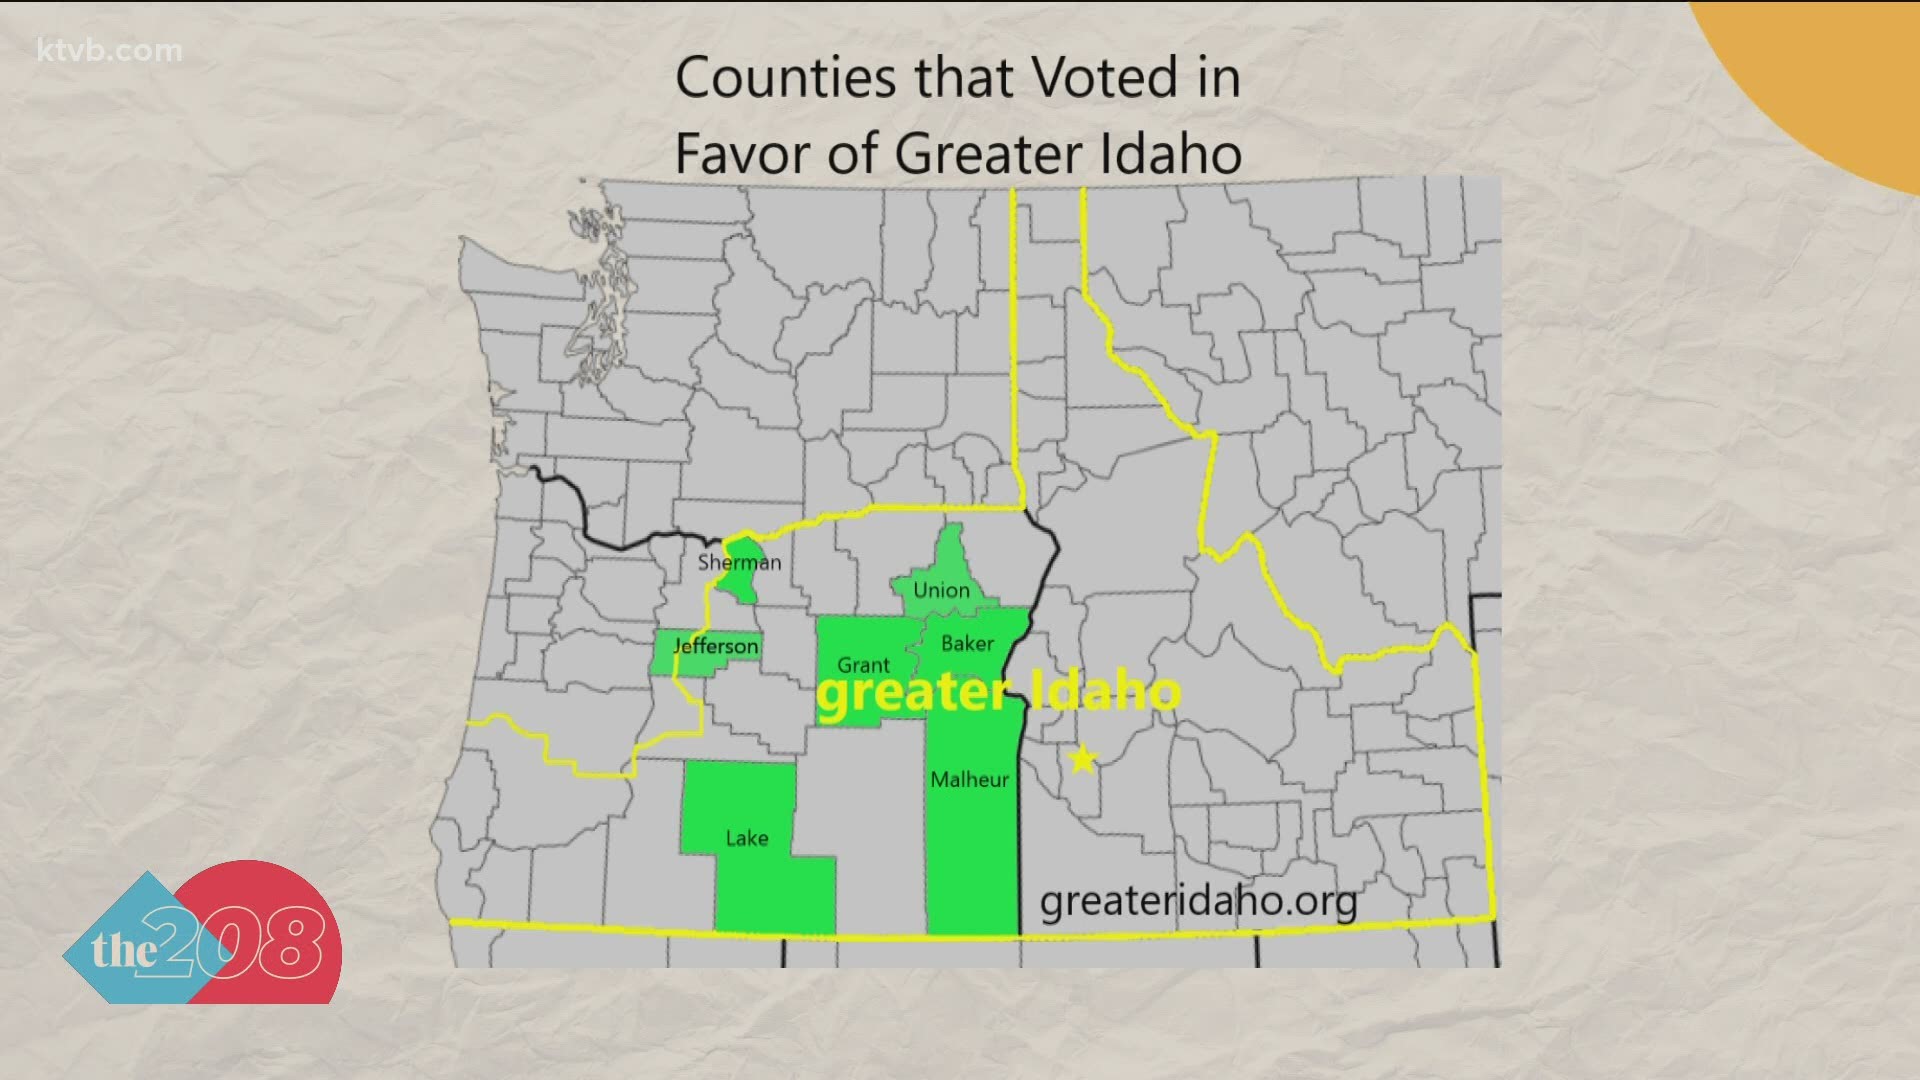 The Oregonian/OregonLive reports Baker, Grant, Lake, Malheur and Sherman counties joined Union and Jefferson with the Tuesday vote.